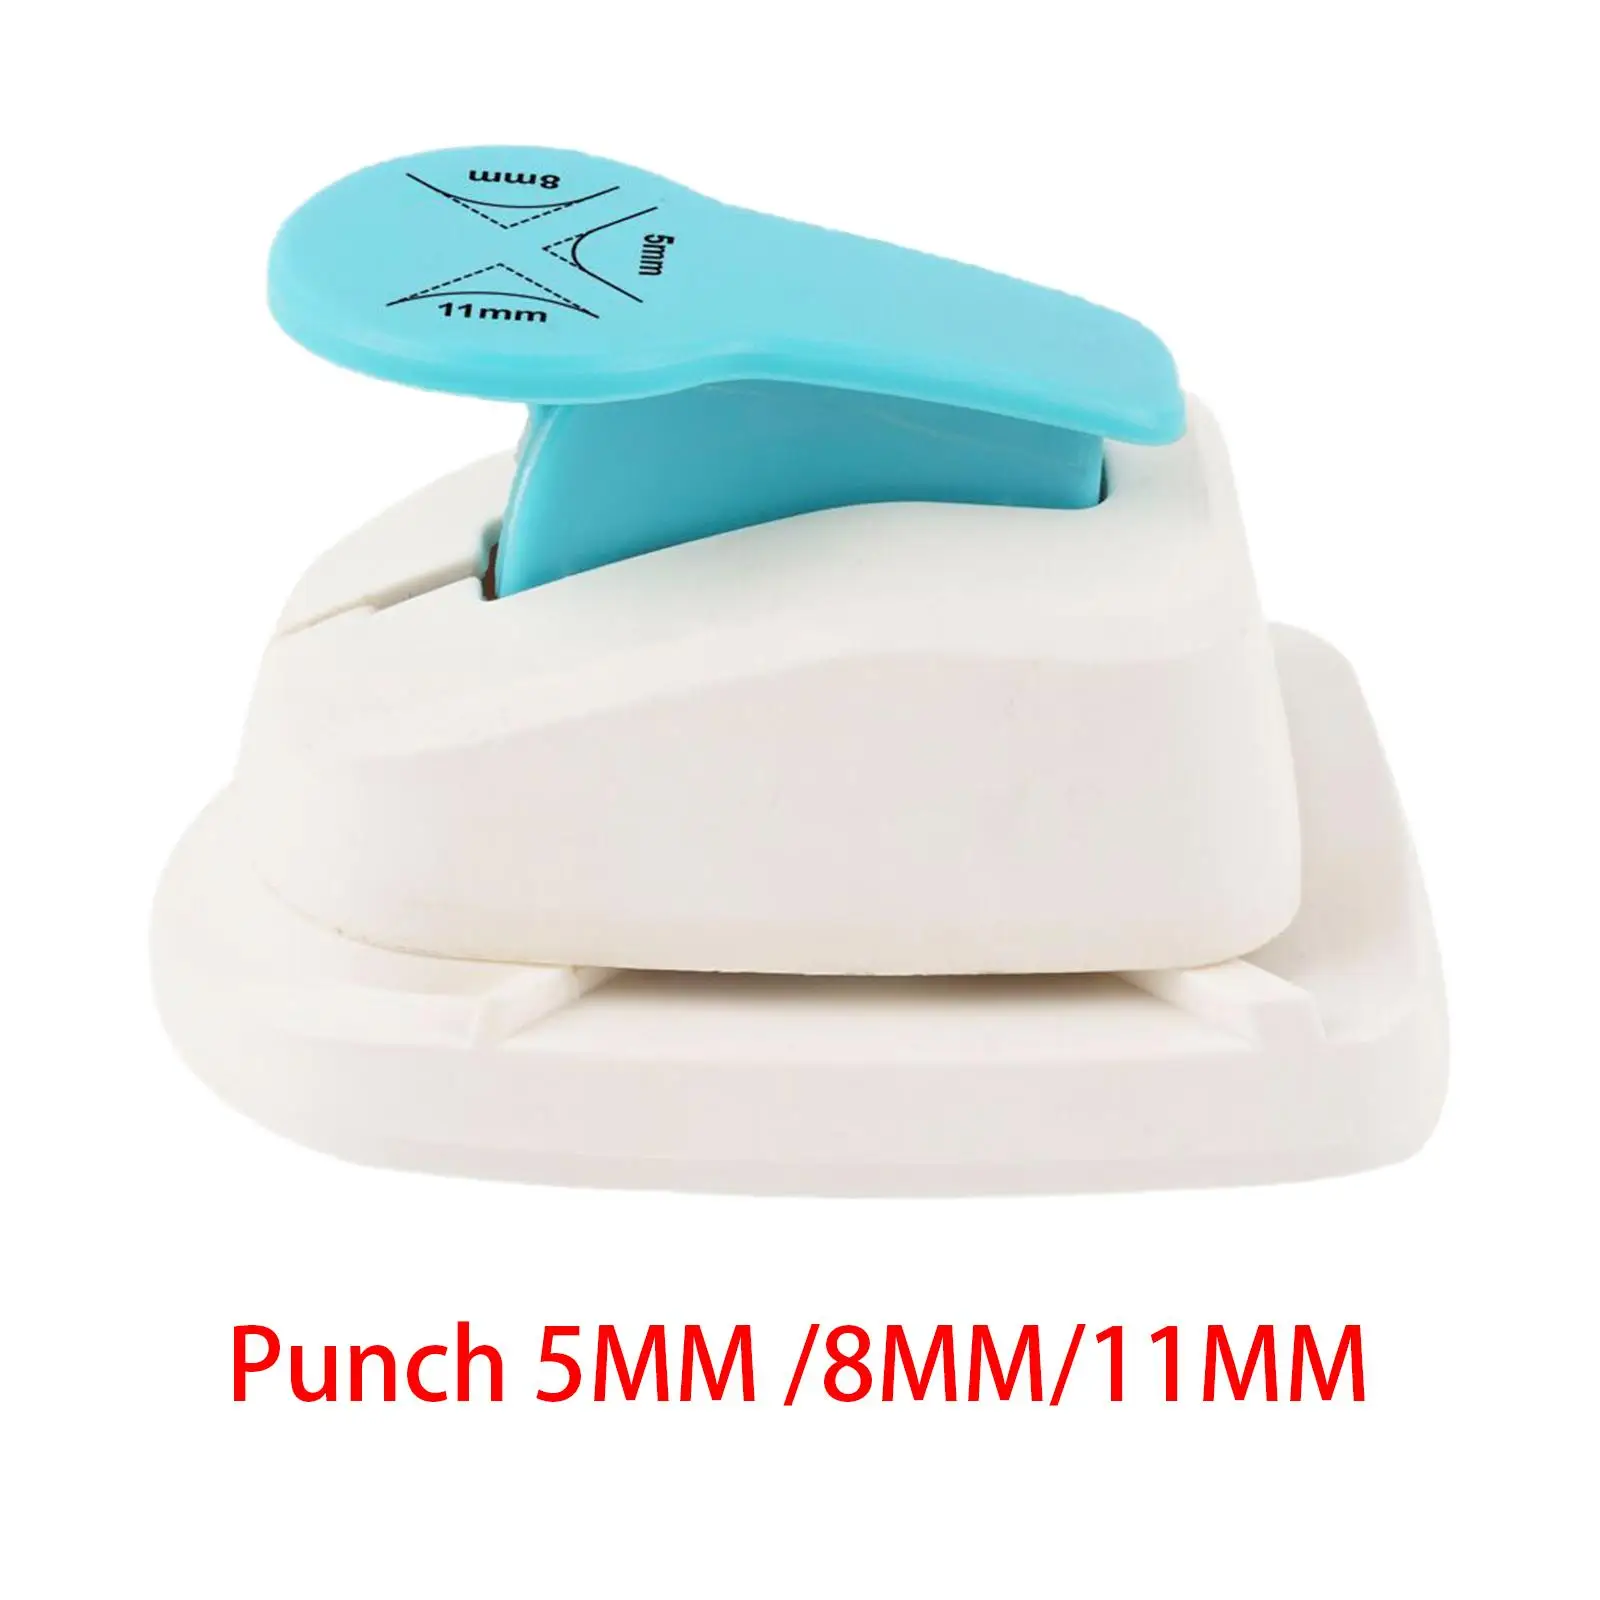 3 in 1 Corner Punch Cutter Hole Puncher Paper Punch for Greeting Card